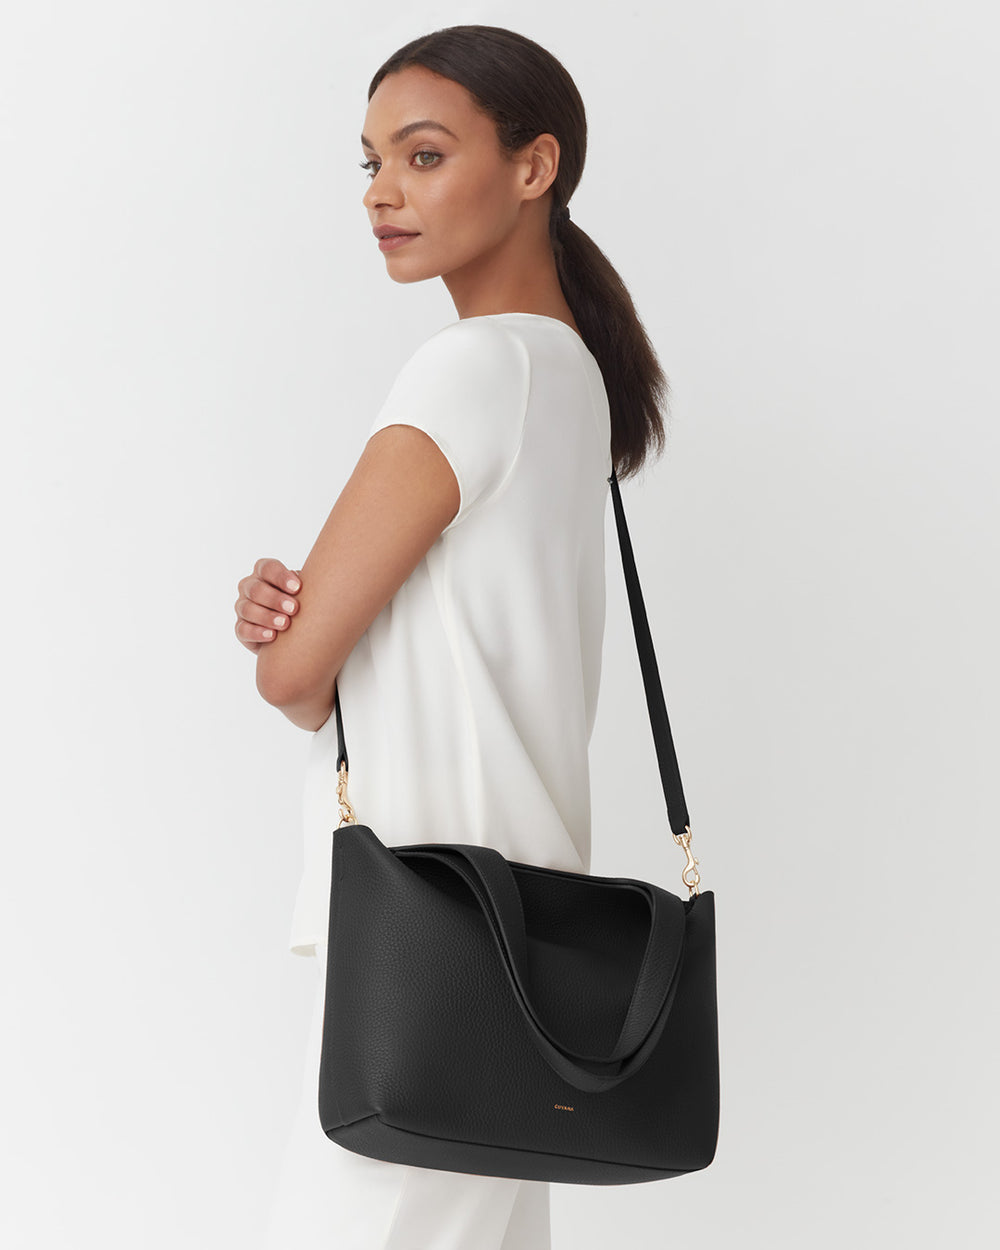 Woman standing with a shoulder bag, looking over her shoulder.